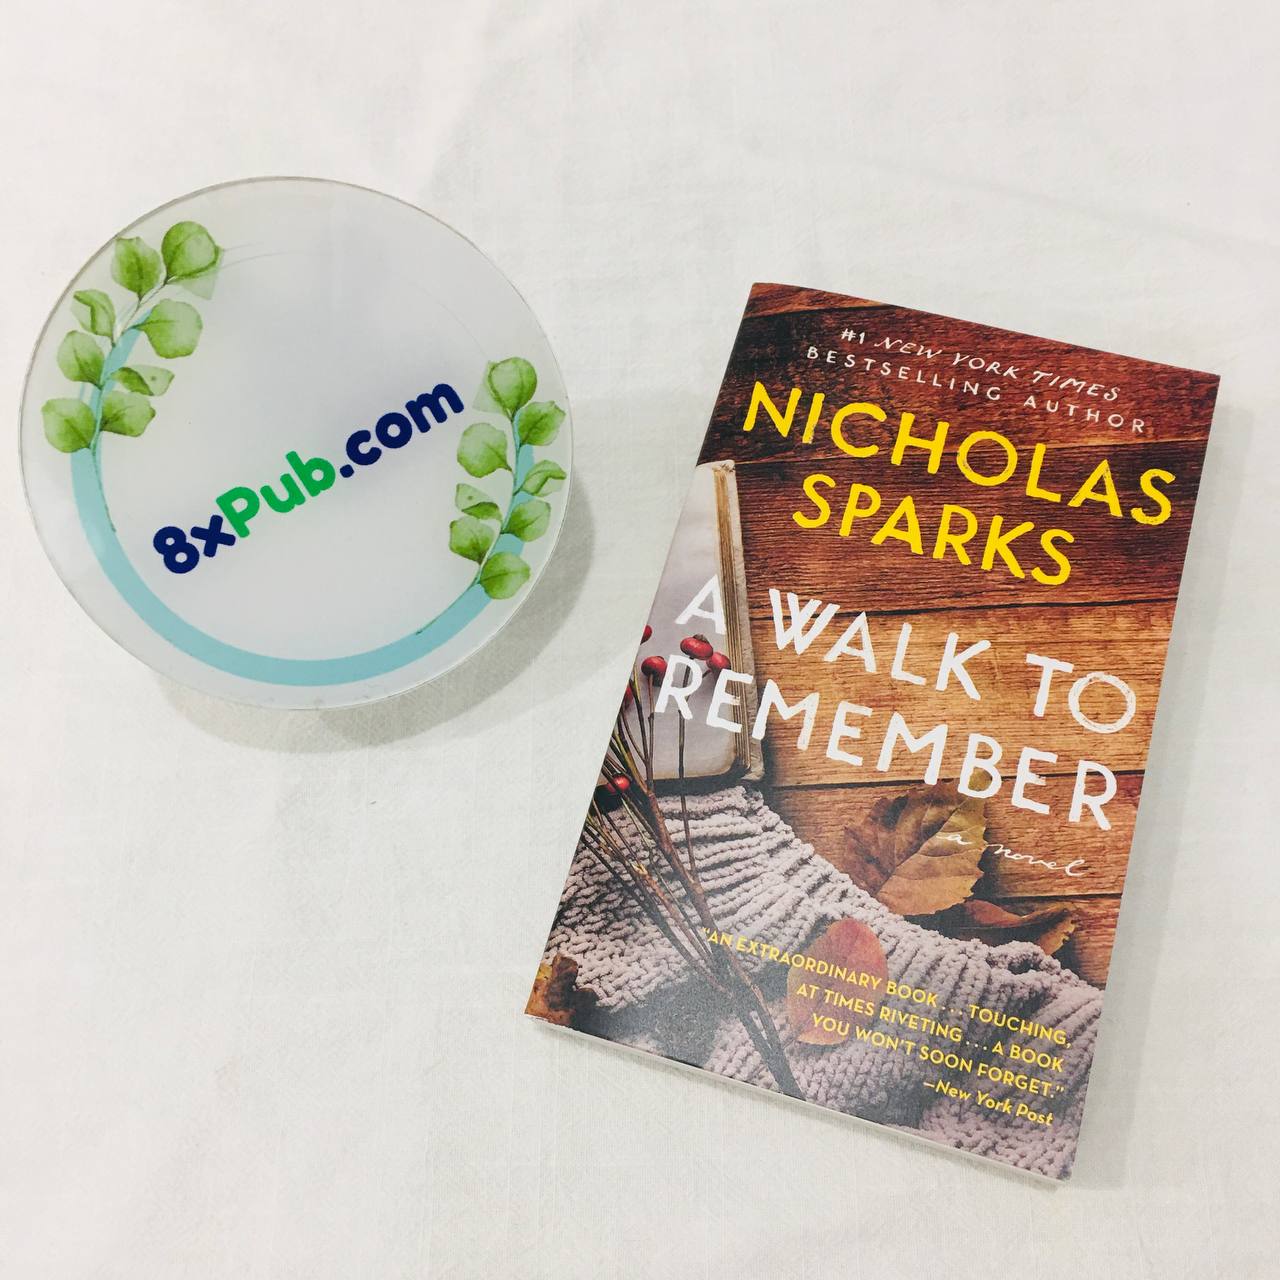 Book - A Walk to Remember by Nicholas Sparks